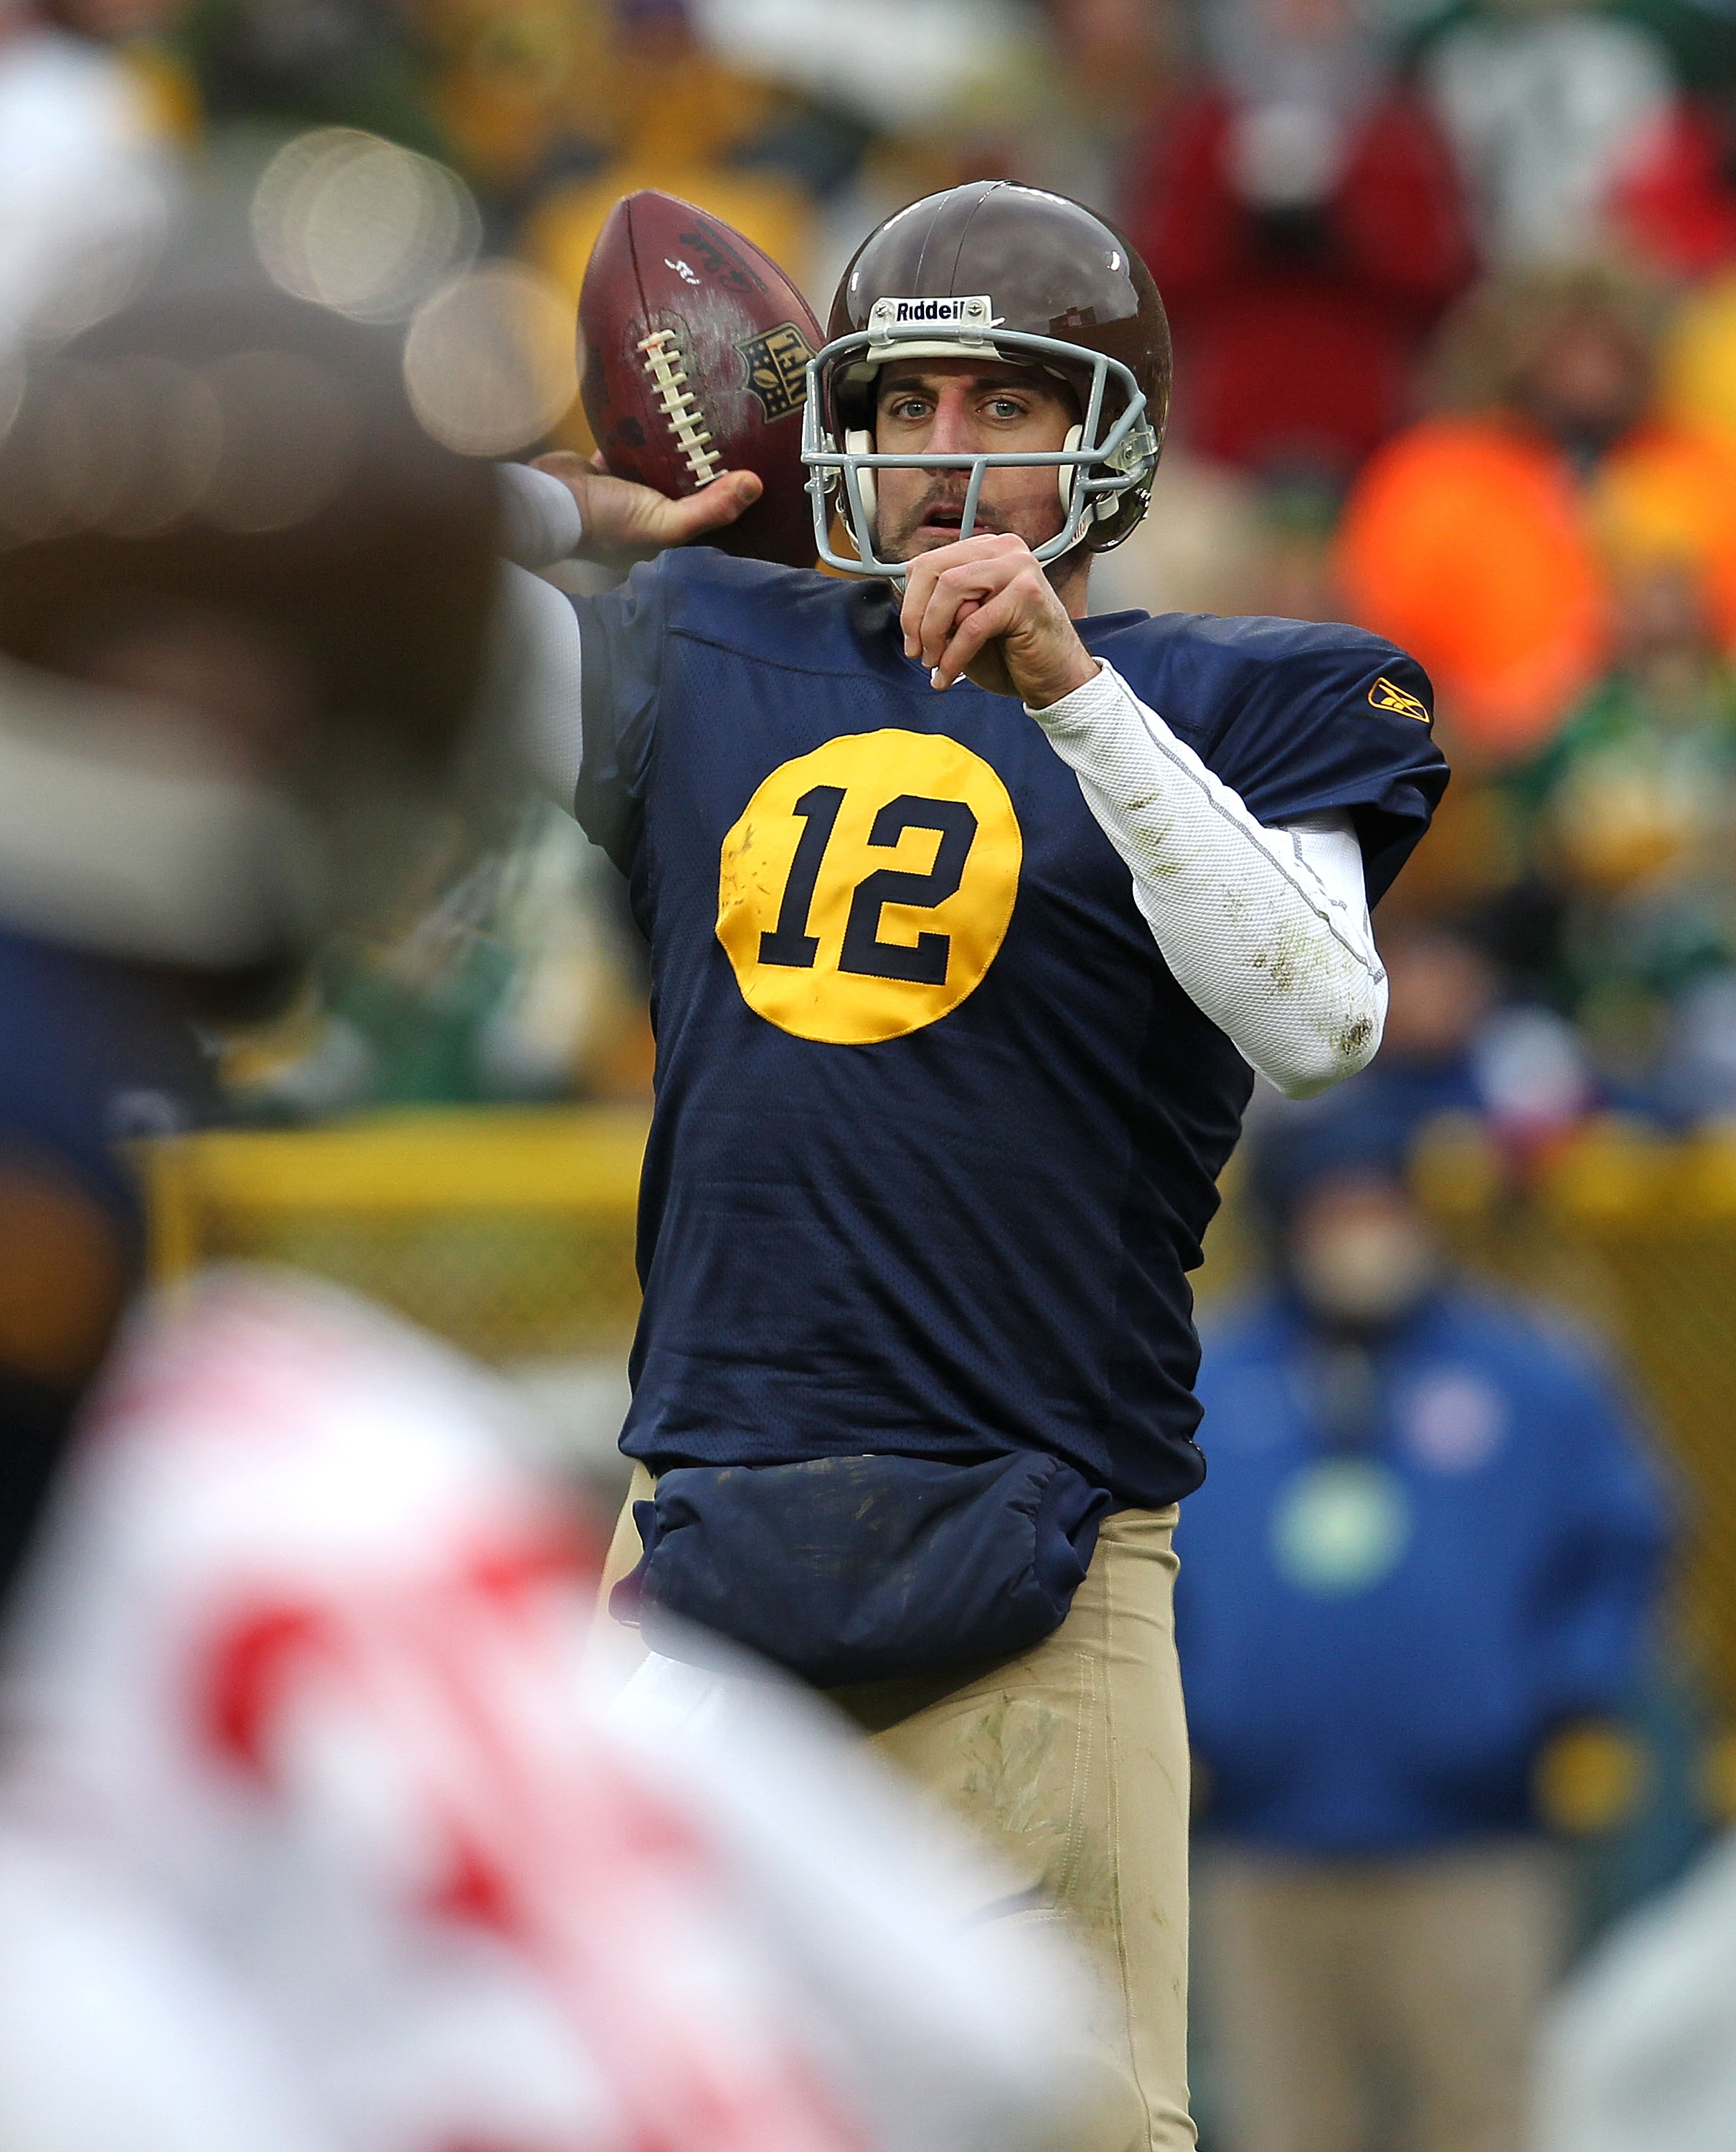 Green Bay Packers Throwback Uniforms Vs. 49ers Are Awesome